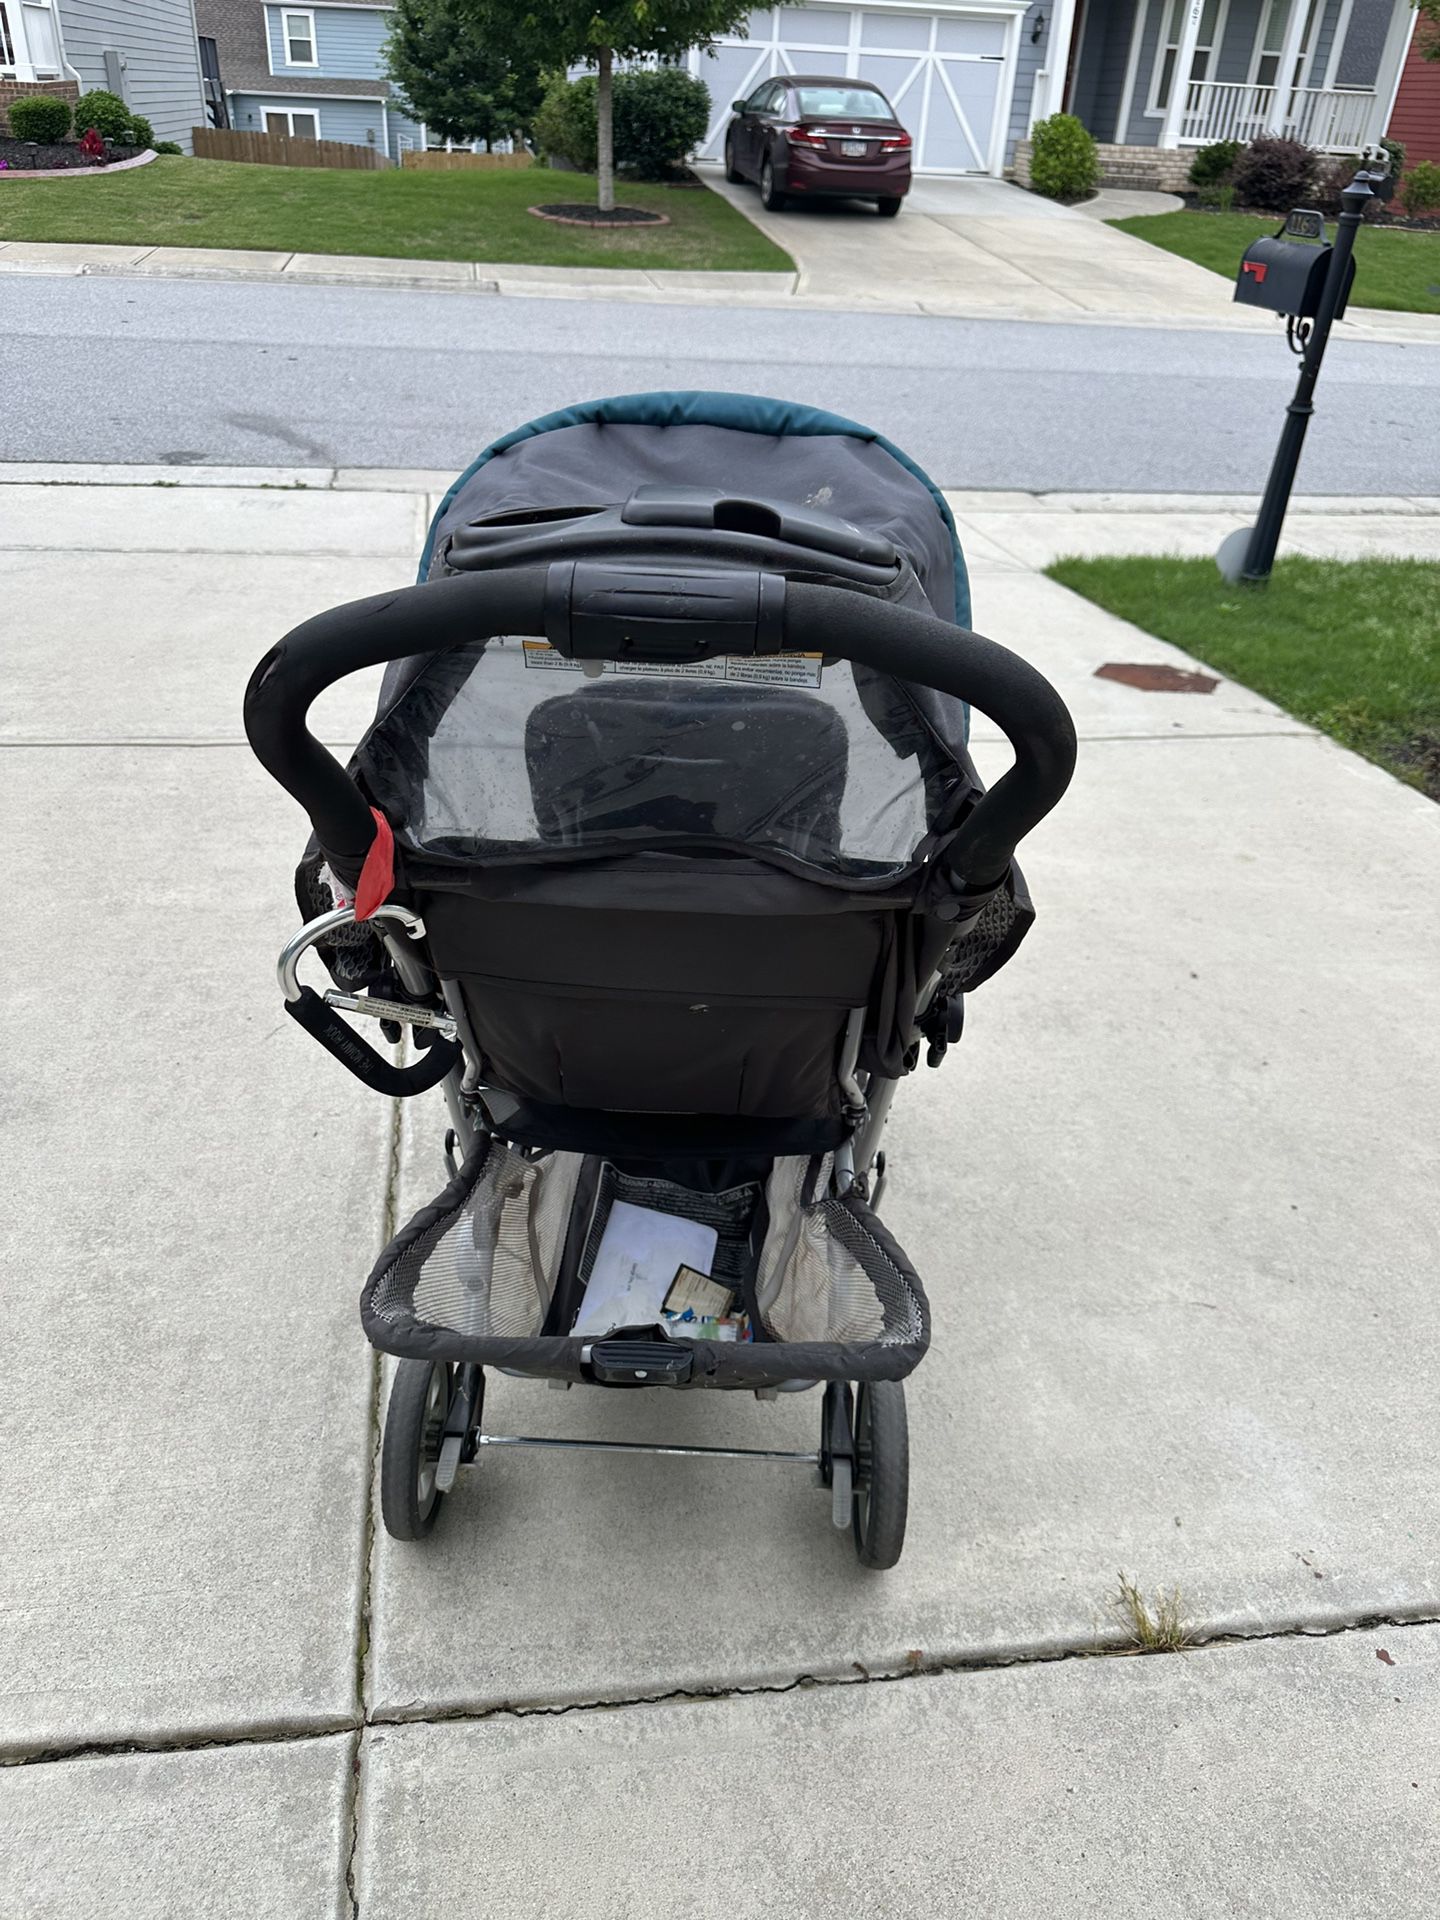 Double stroller For Sale. **Must Go ** $40 Low Price